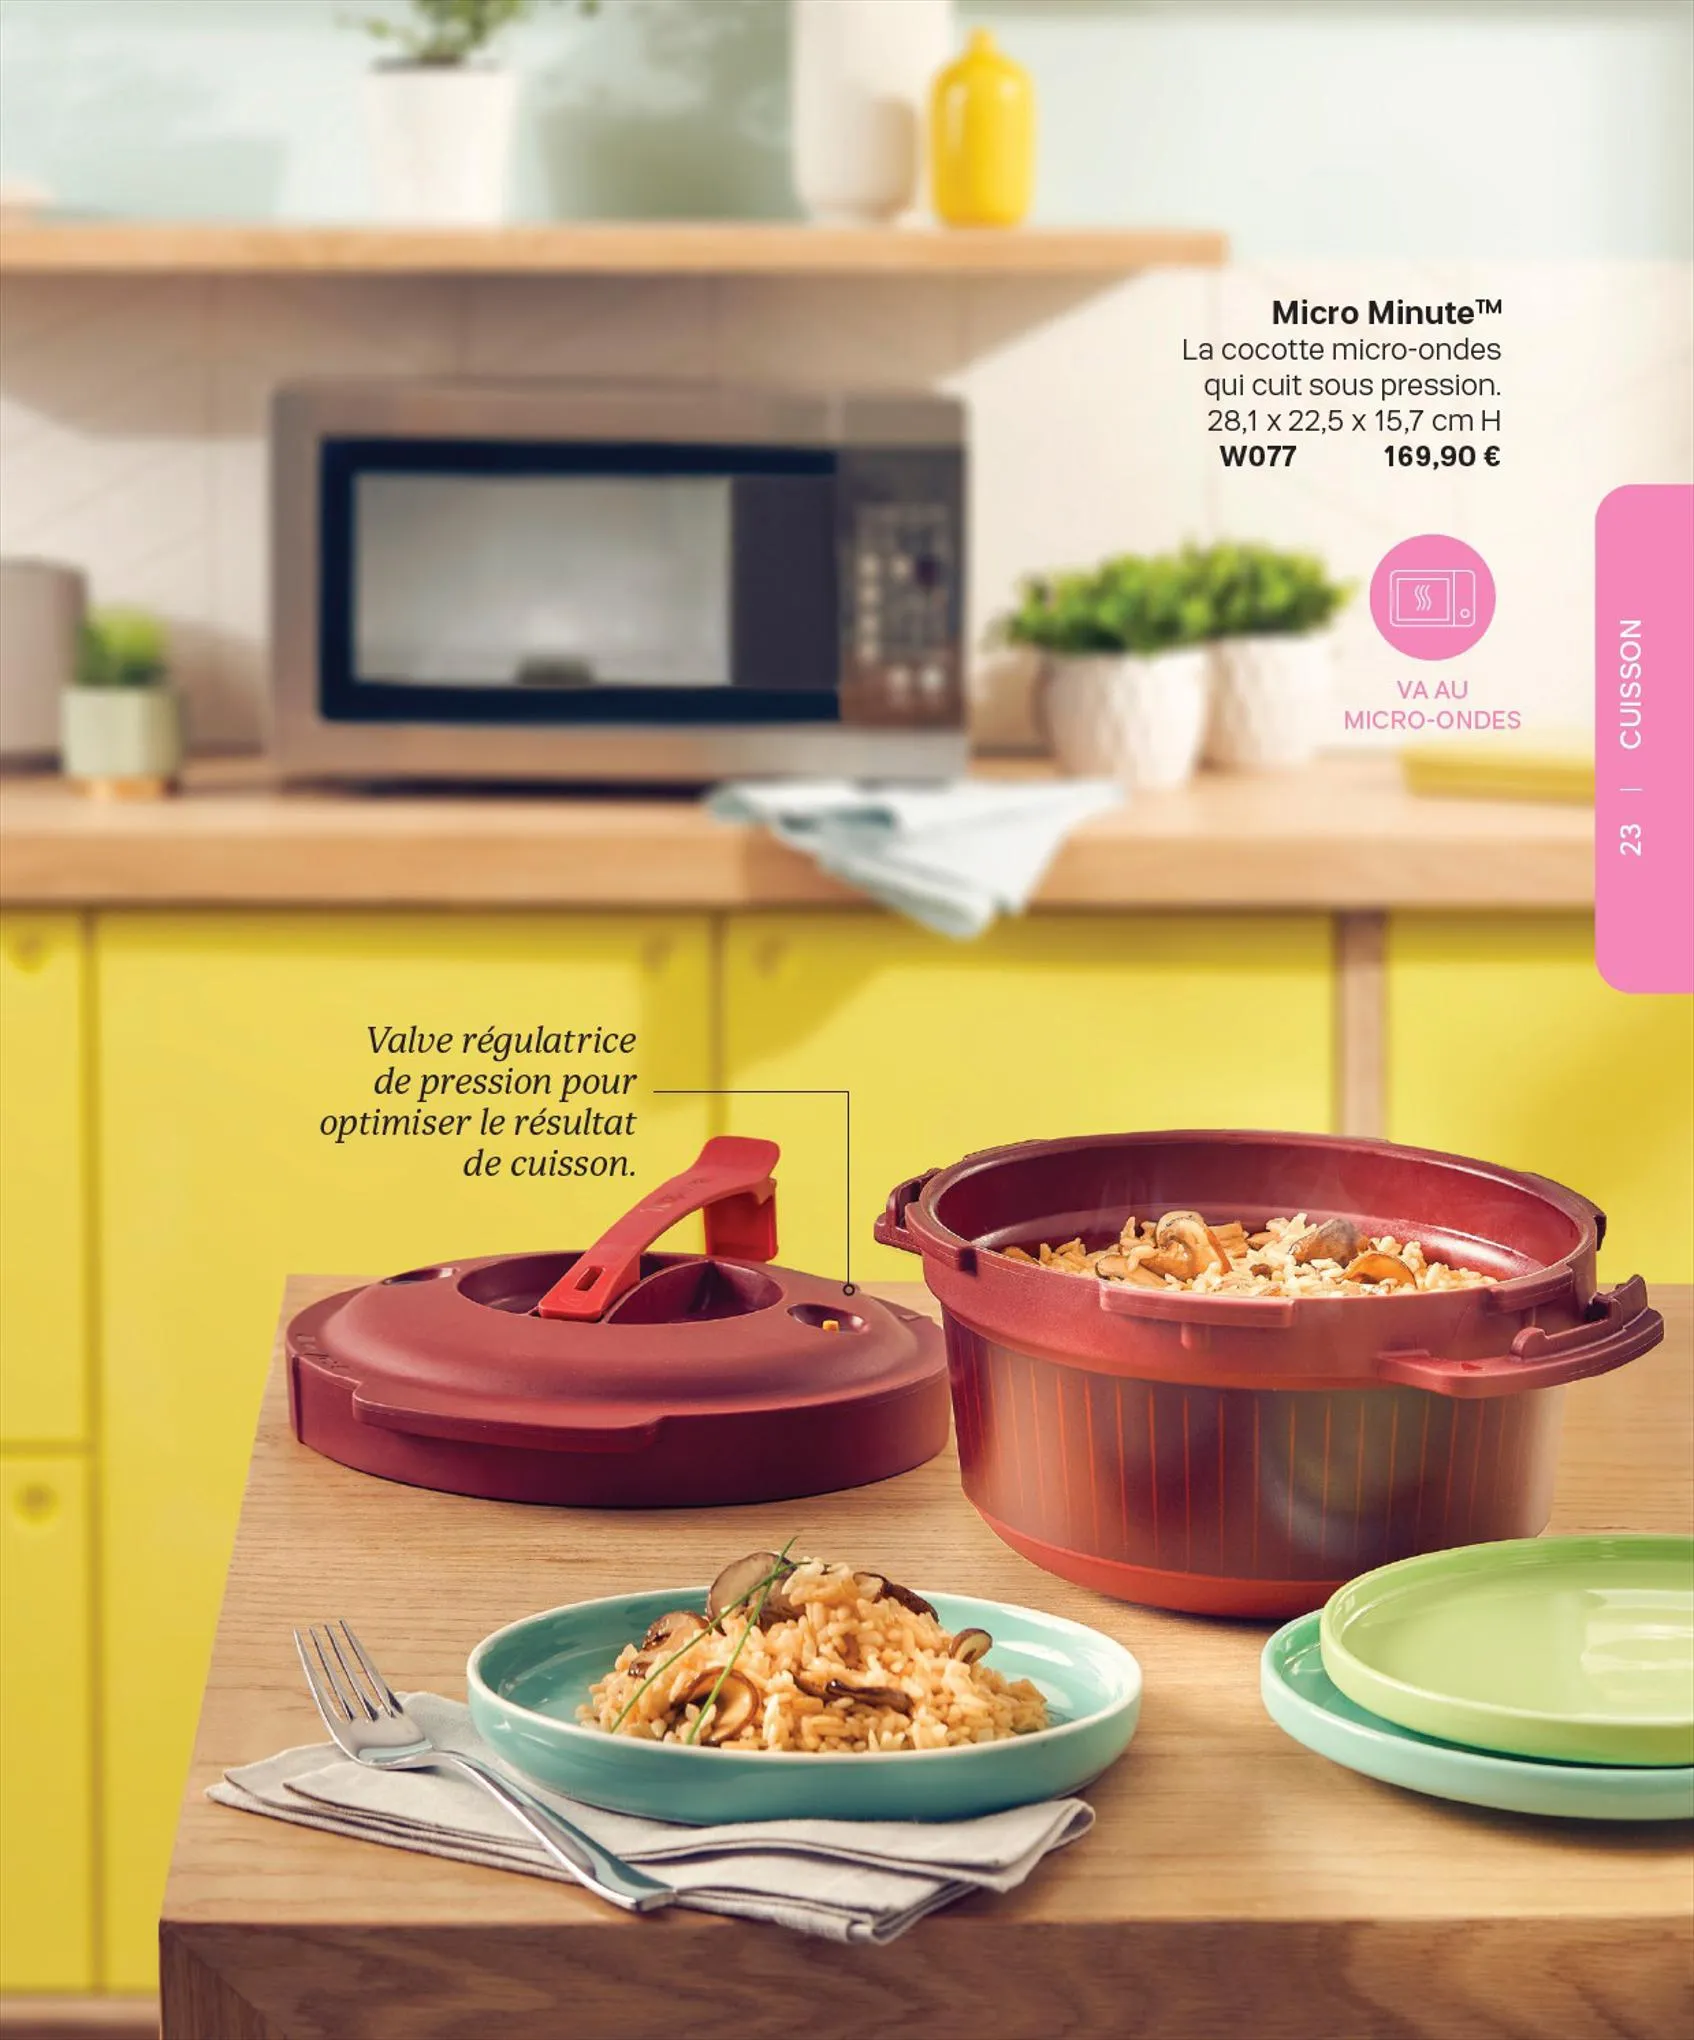 ② Tupperware MicroMinute - Cuiseur à Pression Micro-Ondes